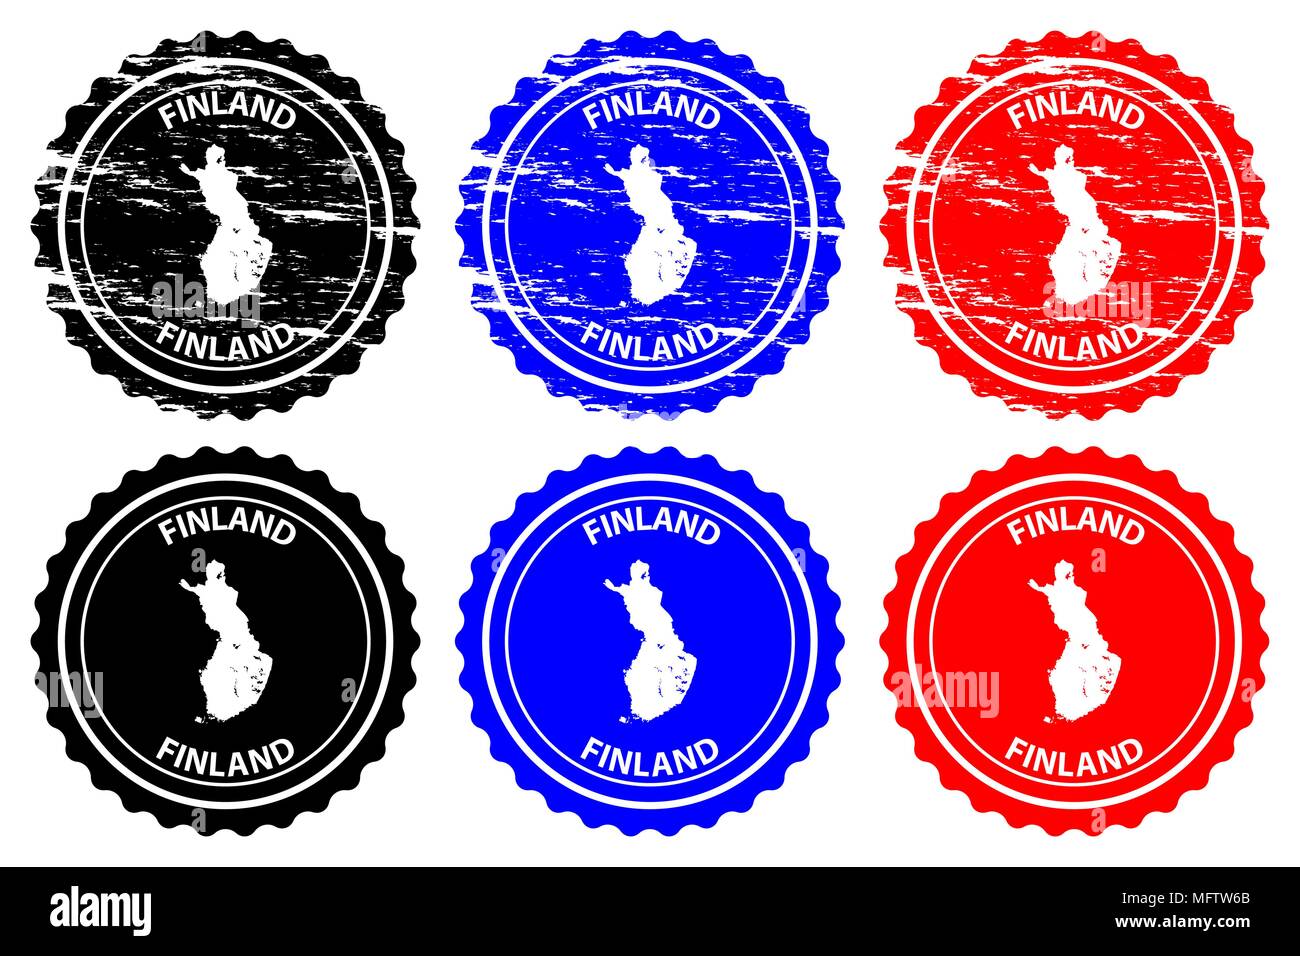 Finland - rubber stamp - vector, Finland map pattern - sticker - black, blue and red Stock Vector